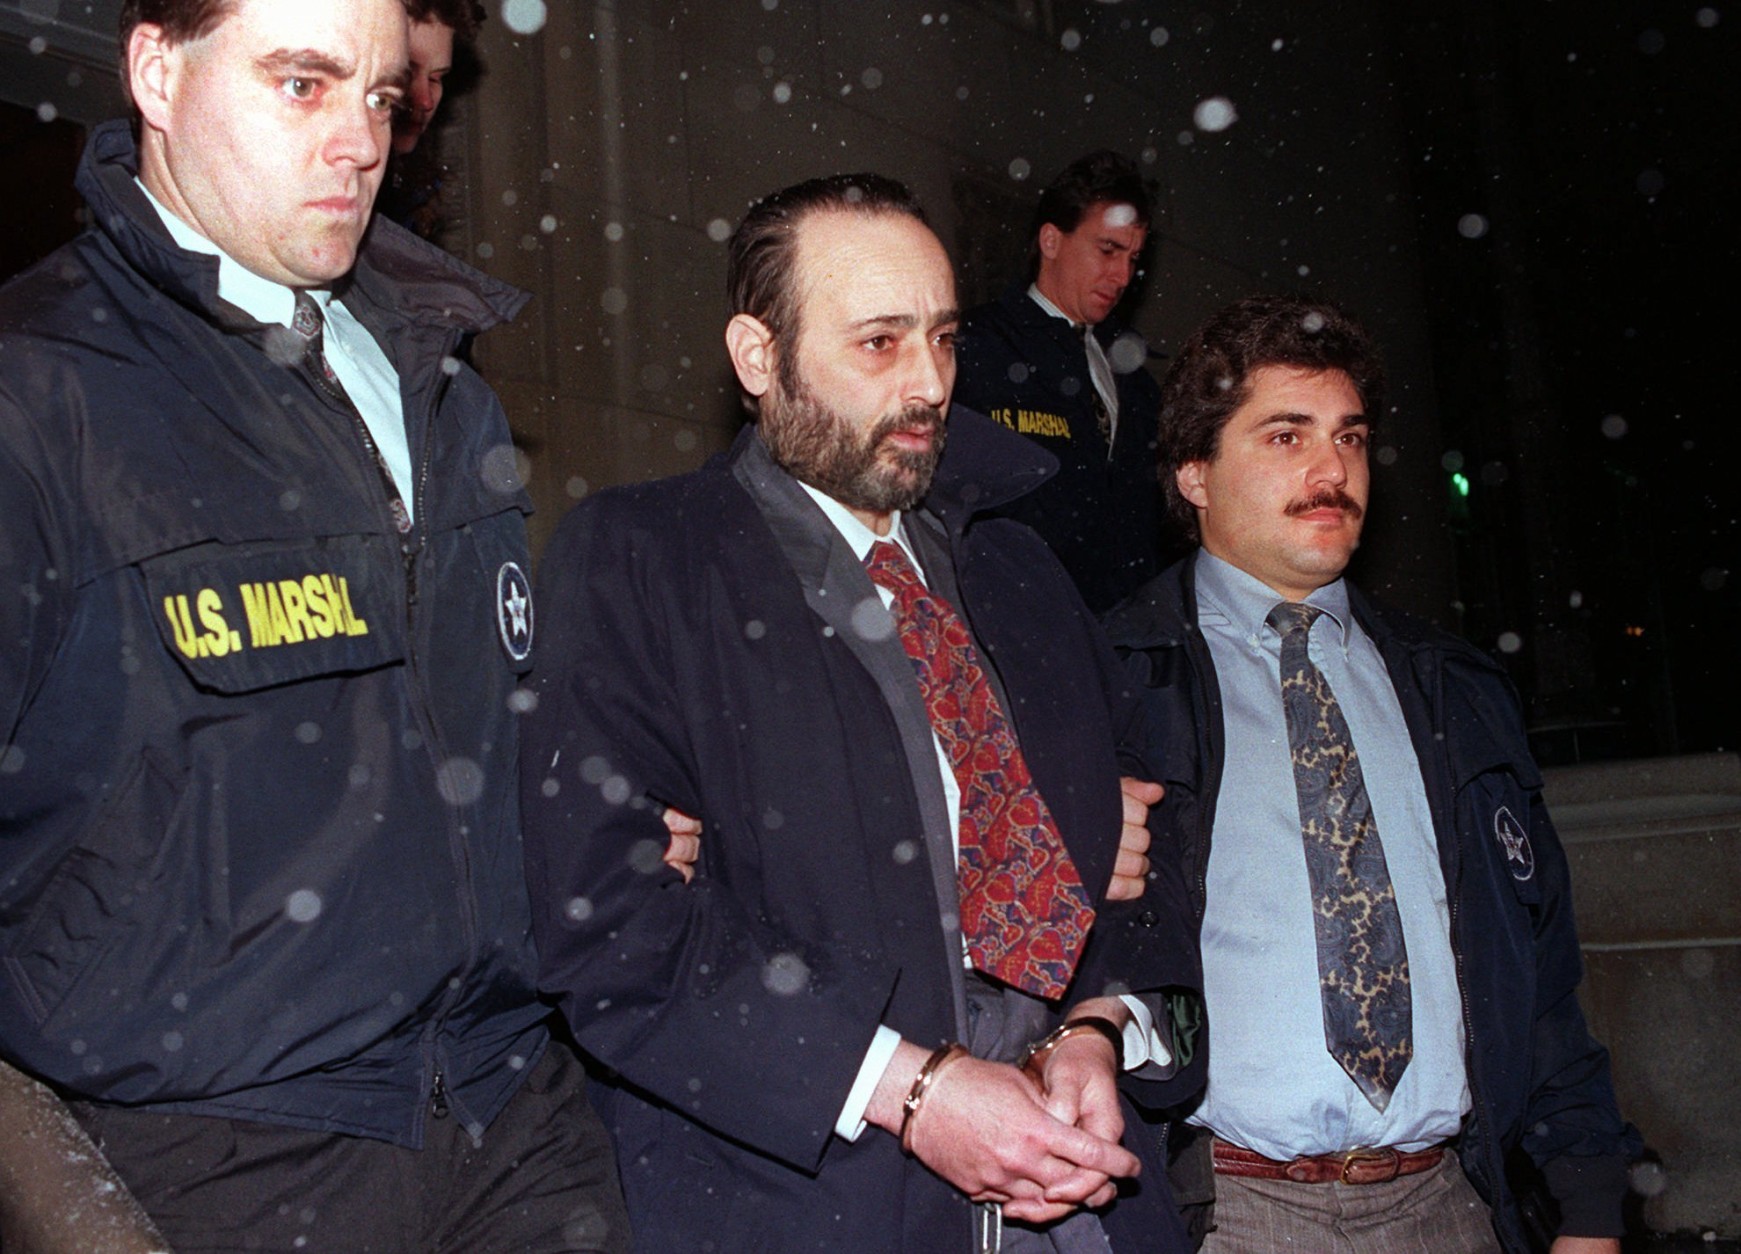 In this Jan. 11, 1993 file photo, "Crazy" Eddie Antar, center, founder of the Crazy Eddie electronics store chain, is led in handcuffs after being extradited from Israel.  The Bloomfield-Cooper funeral home in Ocean Township, New Jersey, confirmed Sunday, Sept. 11, 2016,  that Antar died Saturday. He was 68.  (AP Photo/Dan Hulshizer, file)